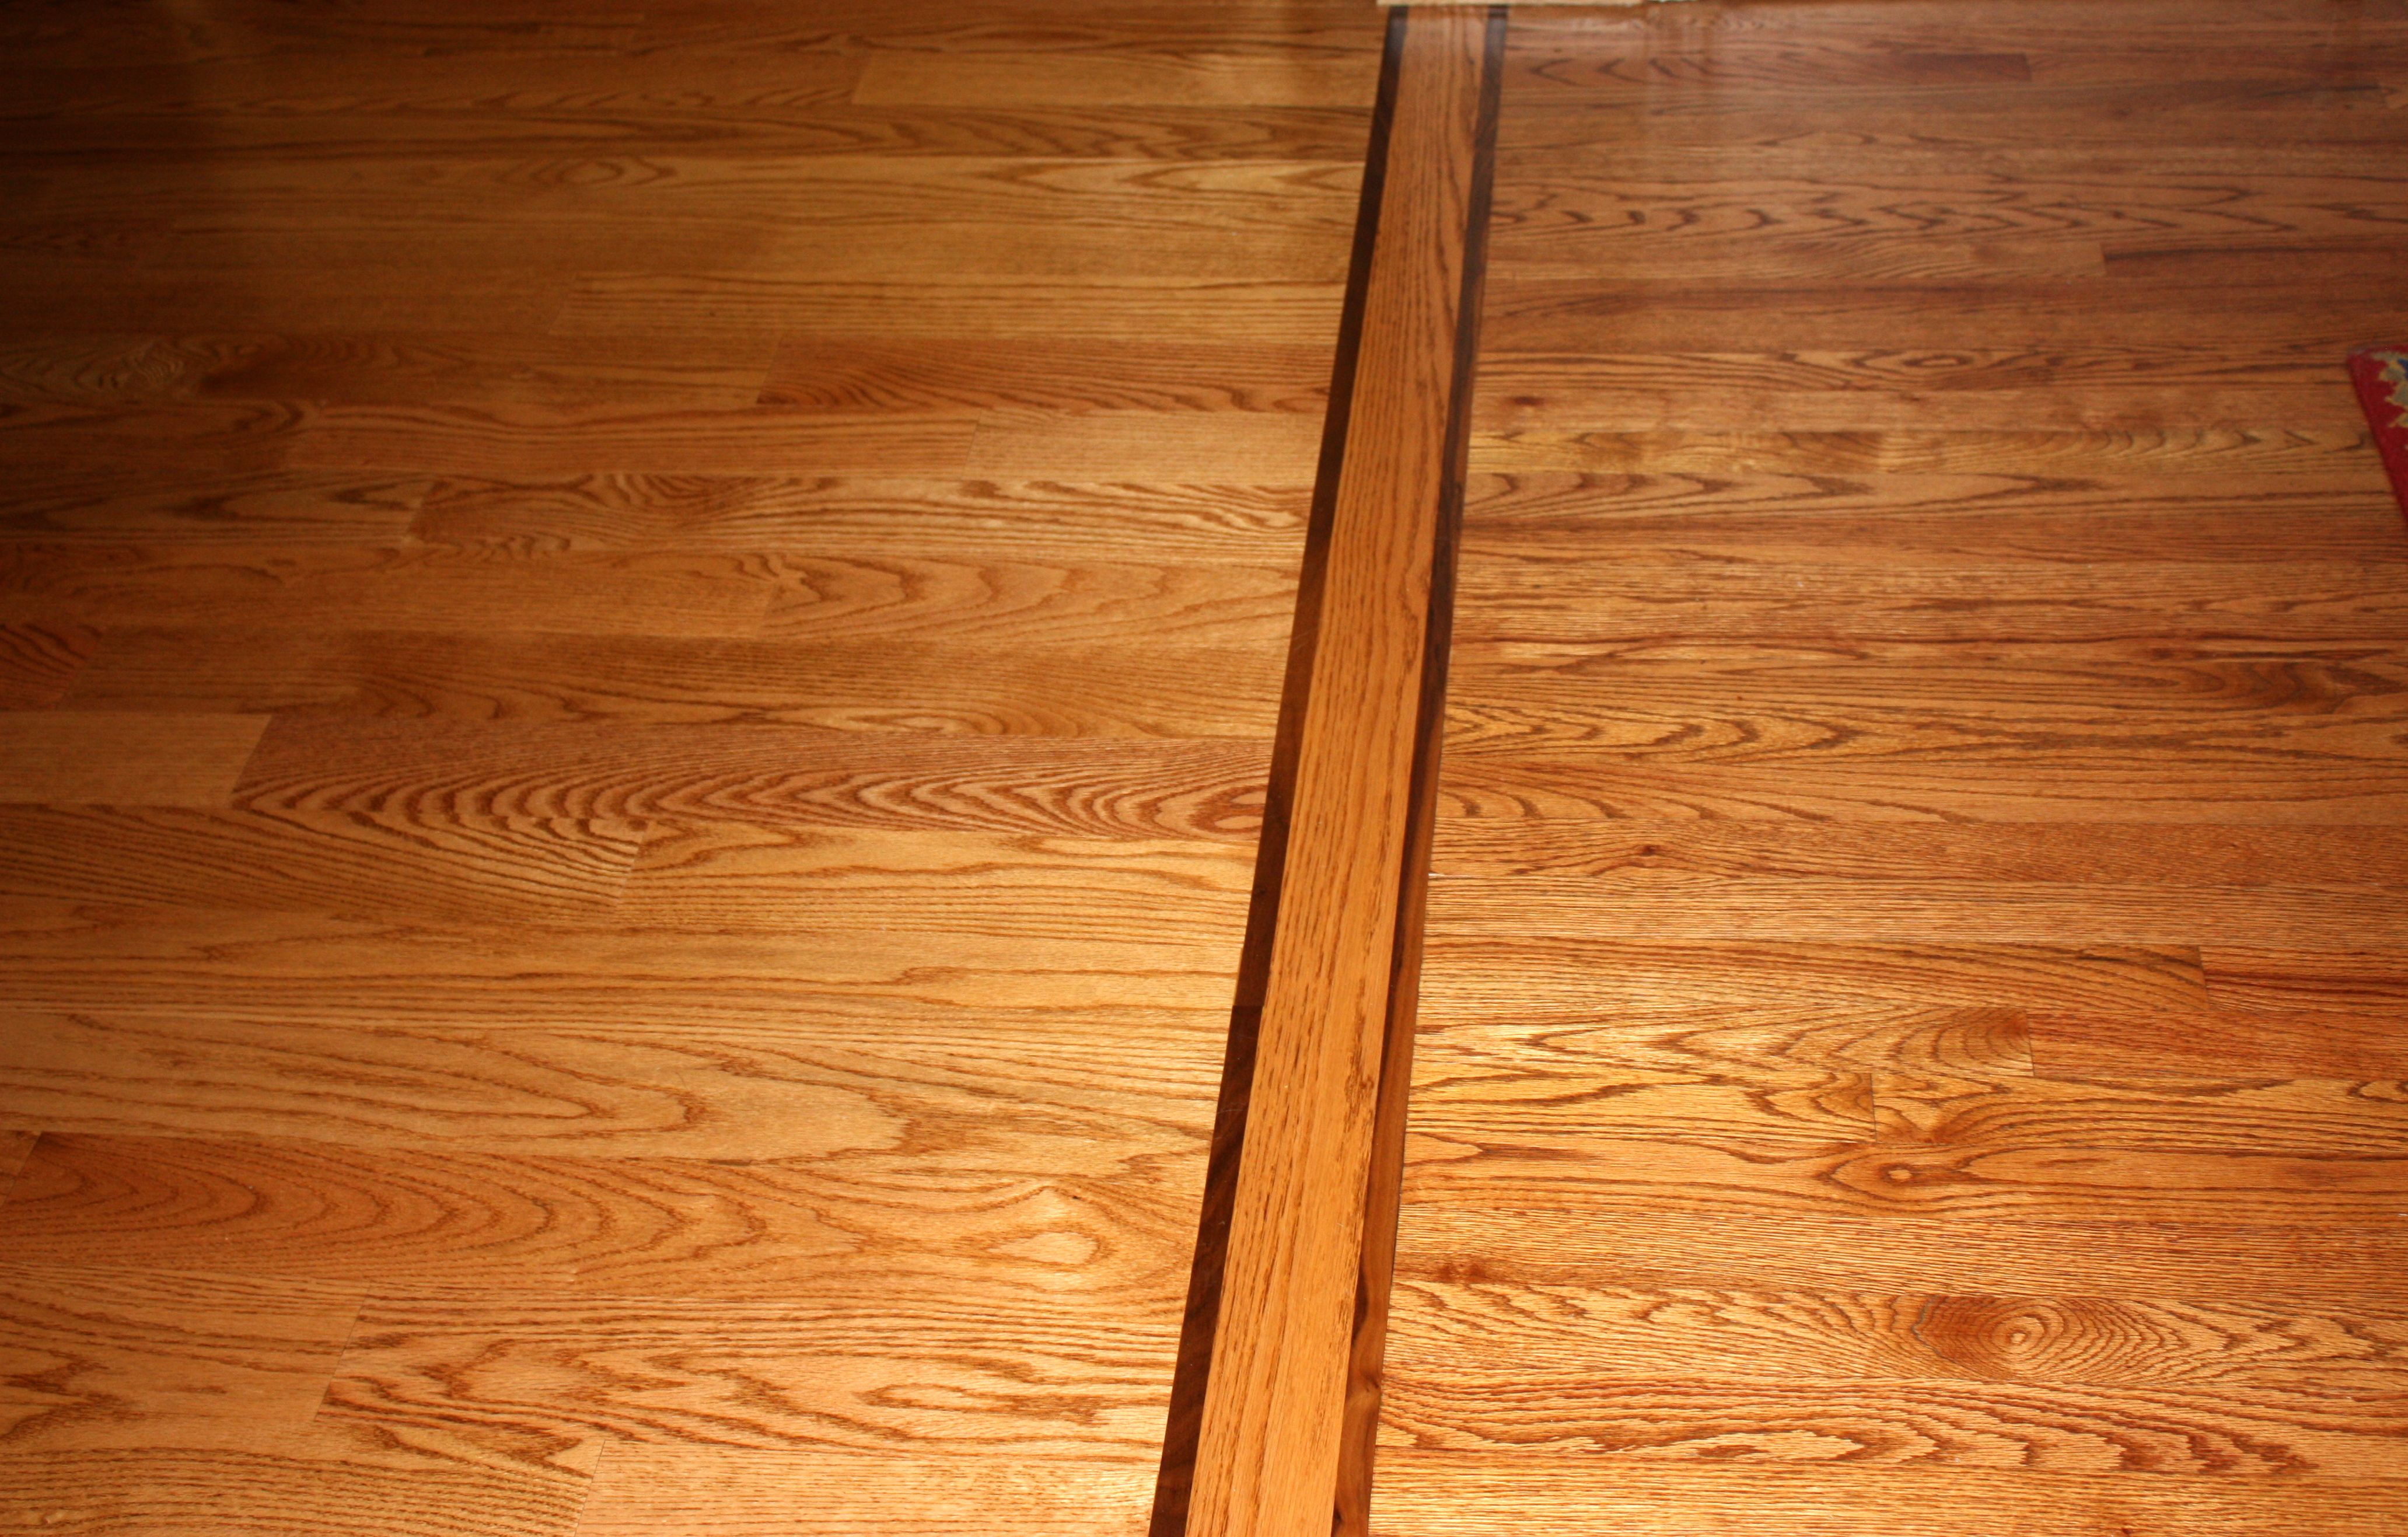 Matching An Existing Hardwood Floor, How To Match Old Pergo Flooring